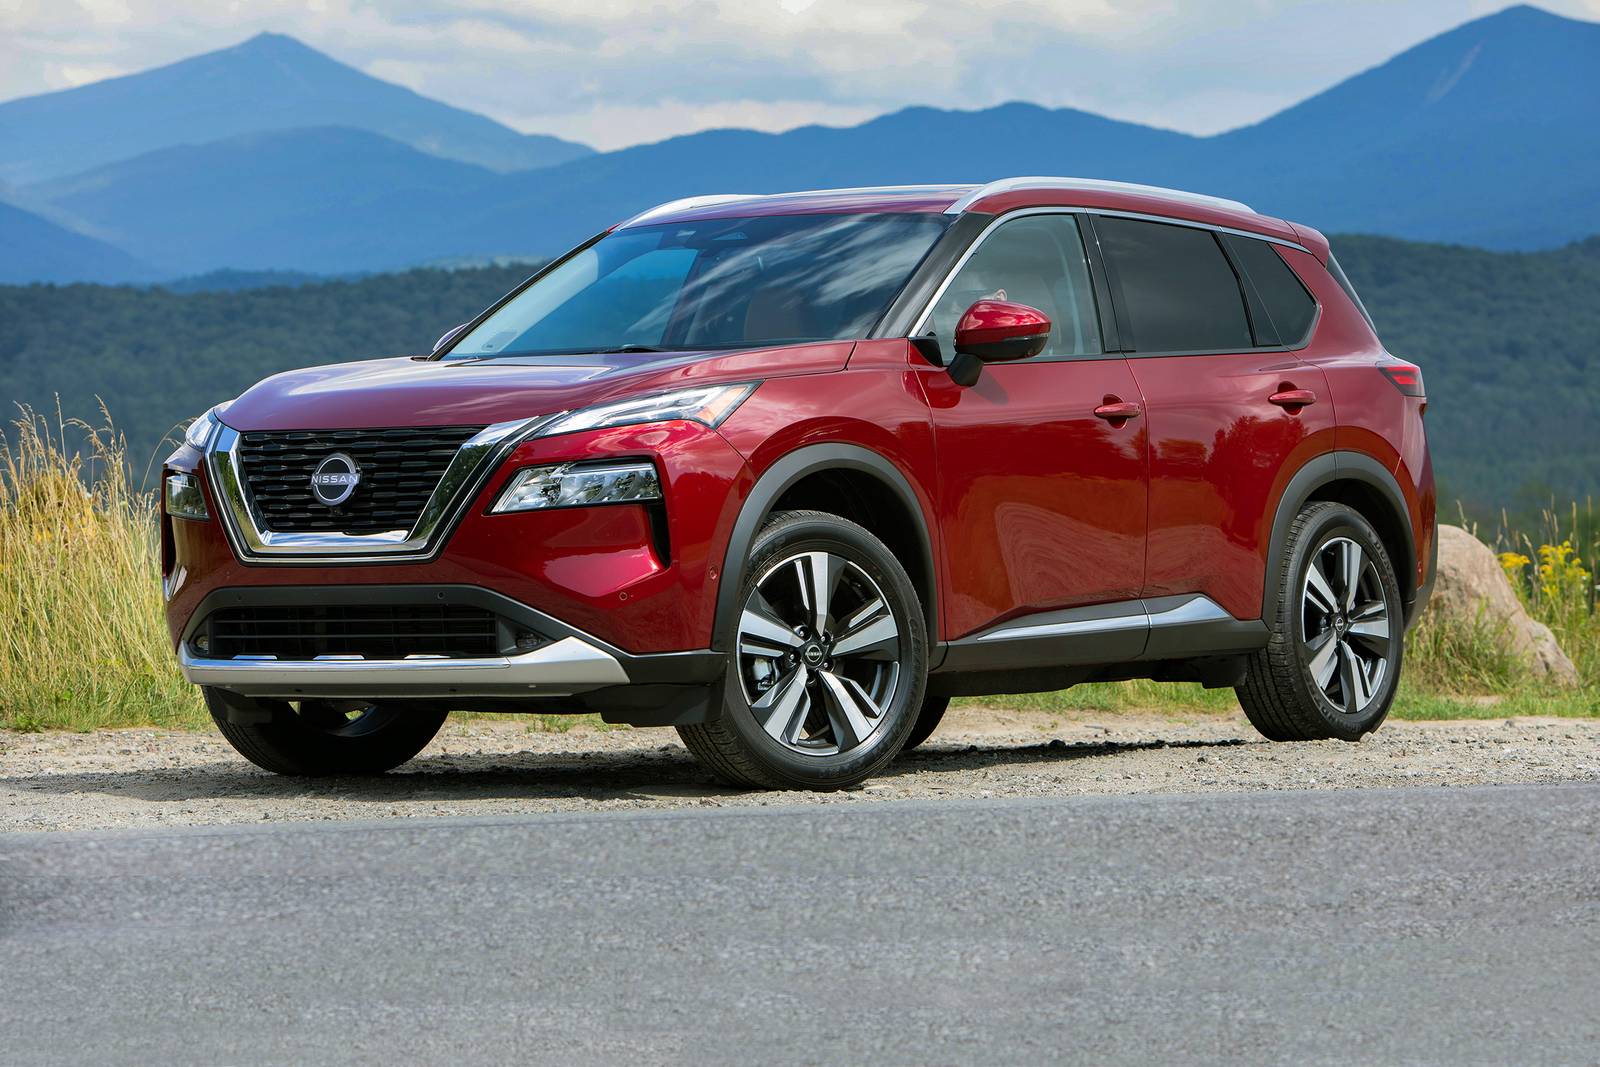 Why should you choose the Nissan Rogue?